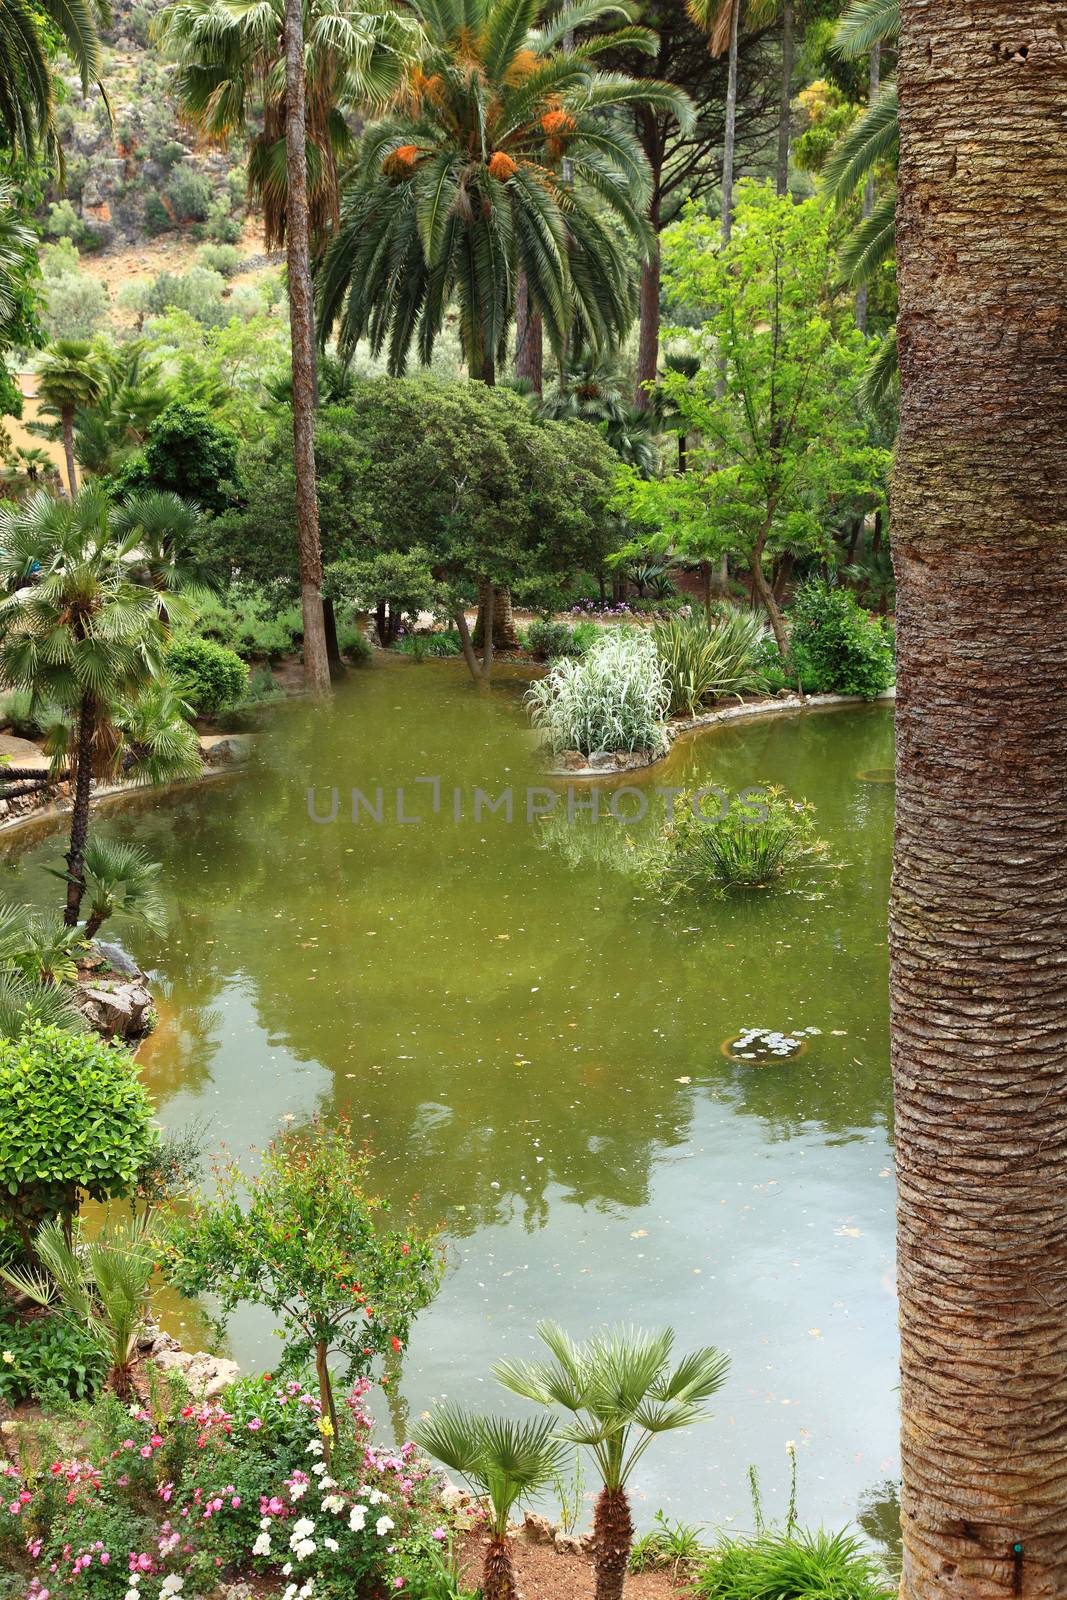 Tranquil pool in a landscaped garden by Farina6000